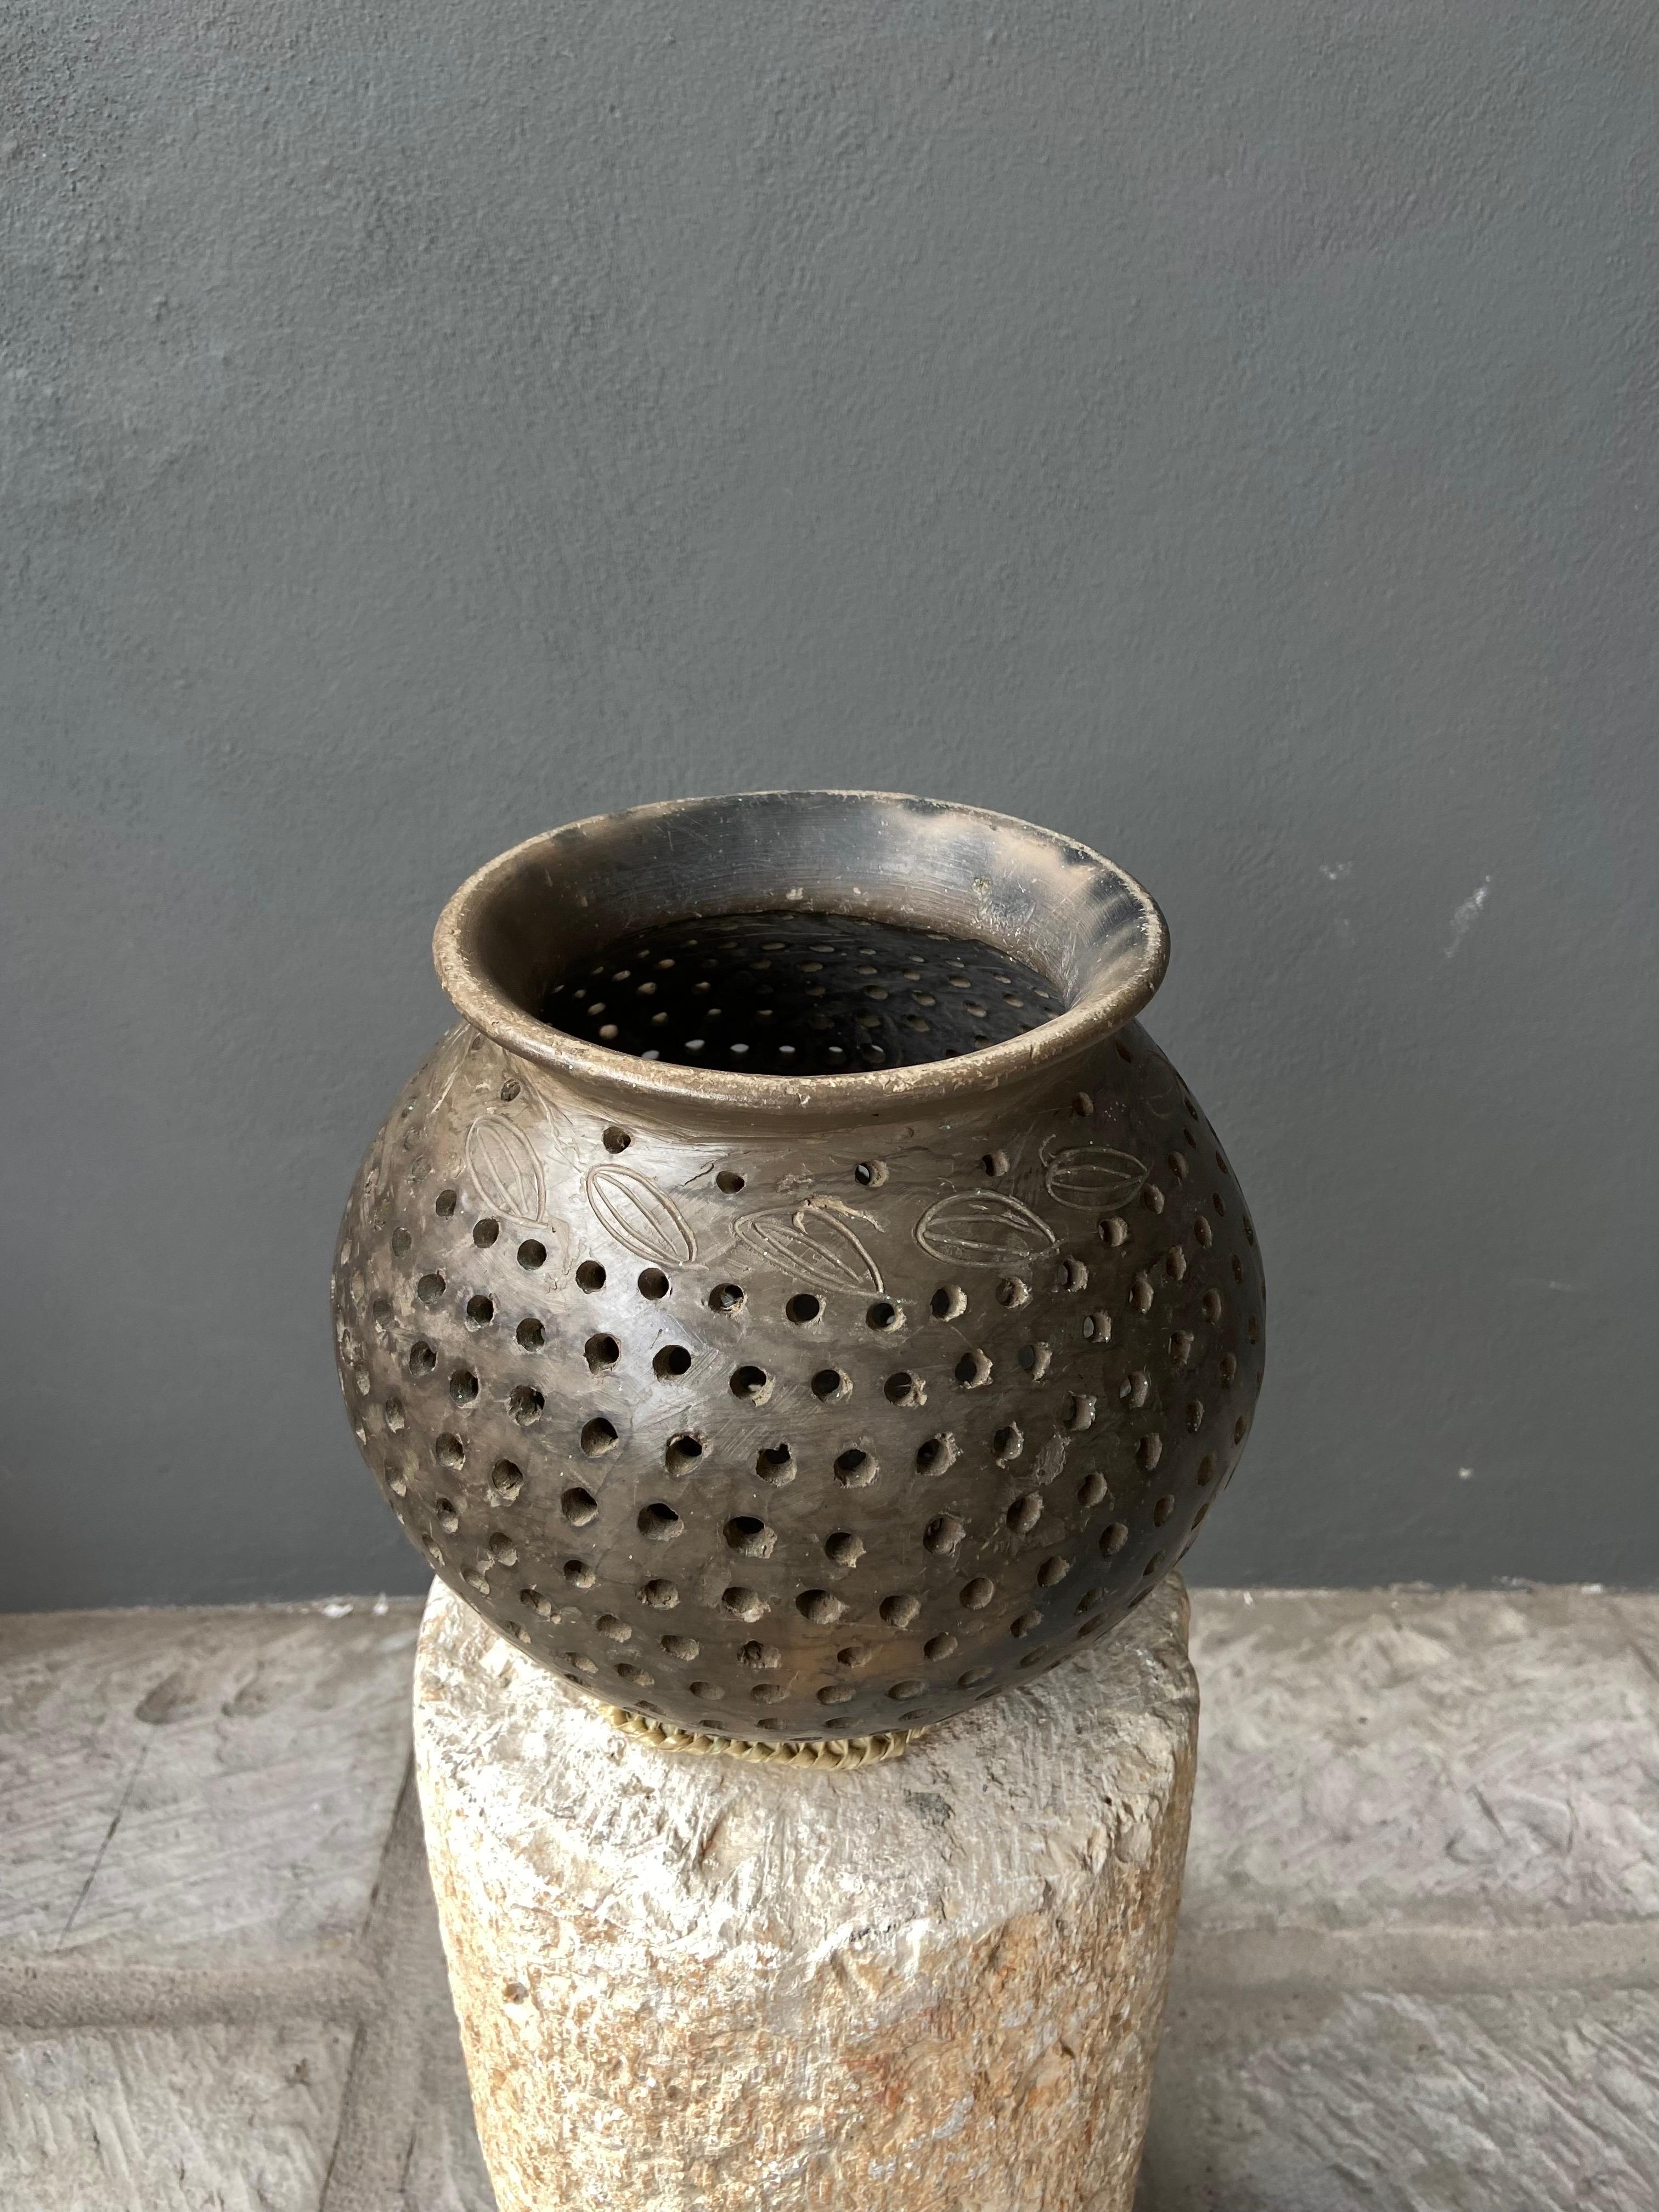 Rustic Ceramic Maize Strainer from Southern Oaxaca, Mexico, circa 1960's